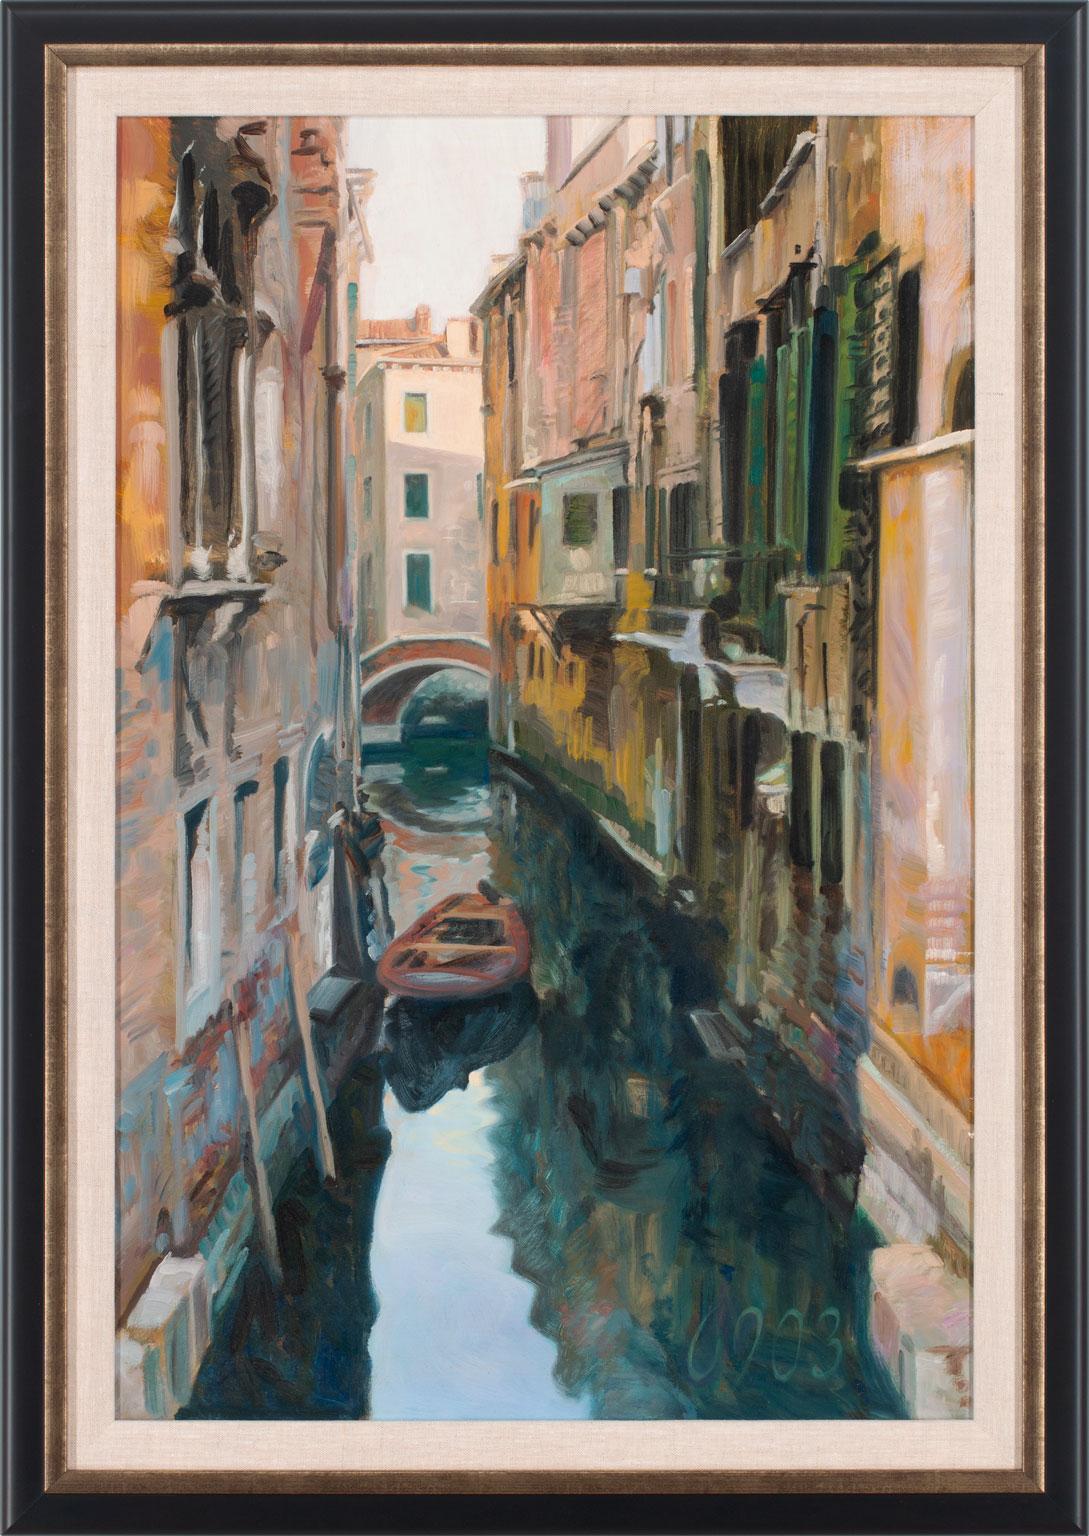 Andrew Jones  Landscape Painting - "Shadowed Canal" Original Oil Painting on Canvas by Andrew Jones, Framed